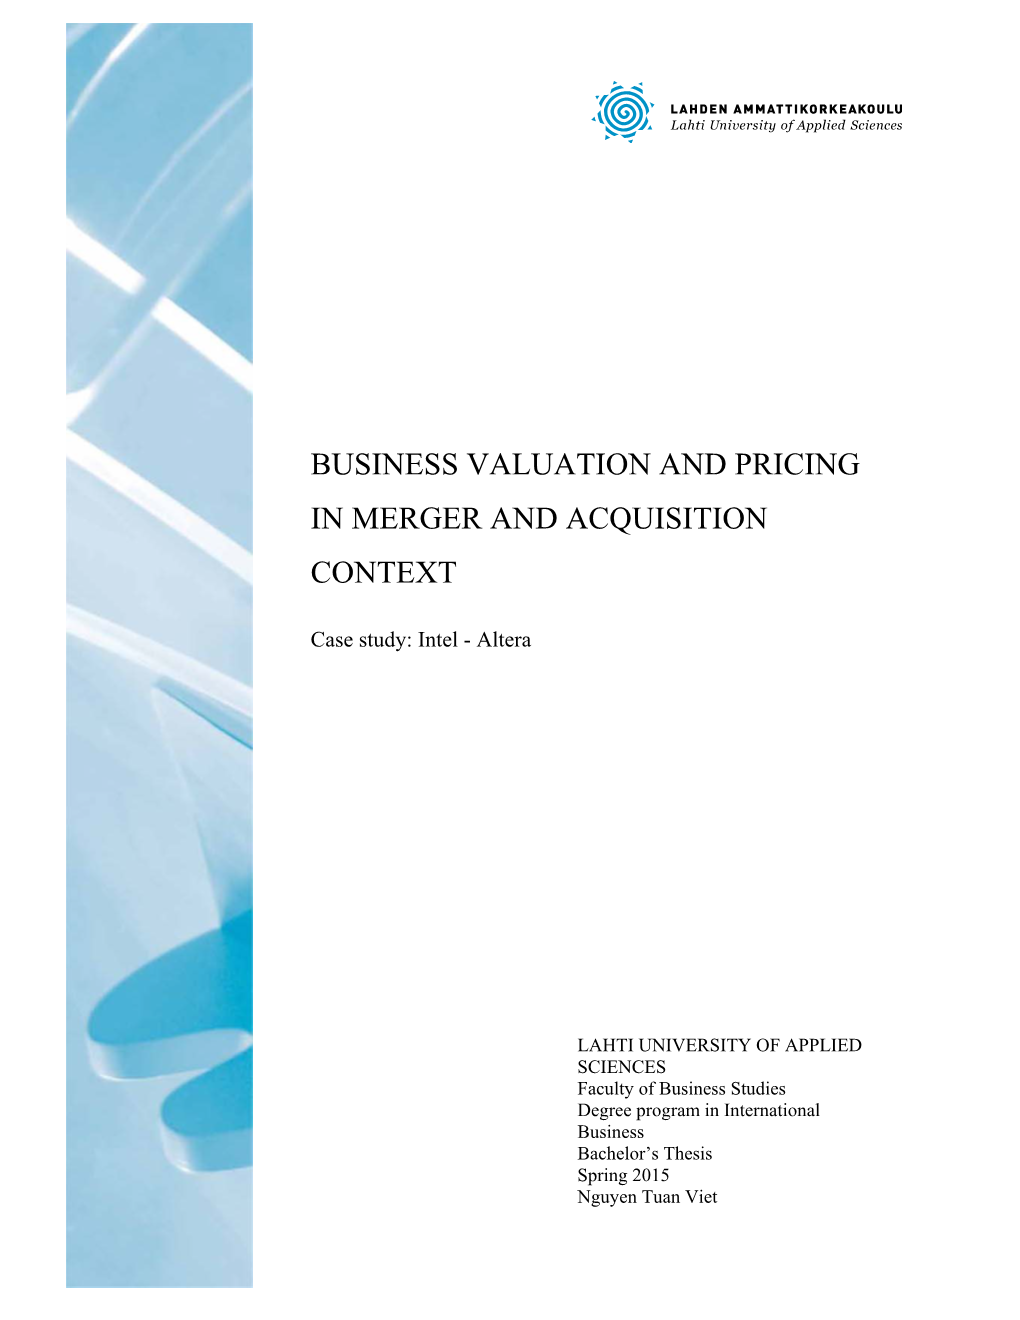 Business Valuation and Pricing in Merger and Acquisition Context